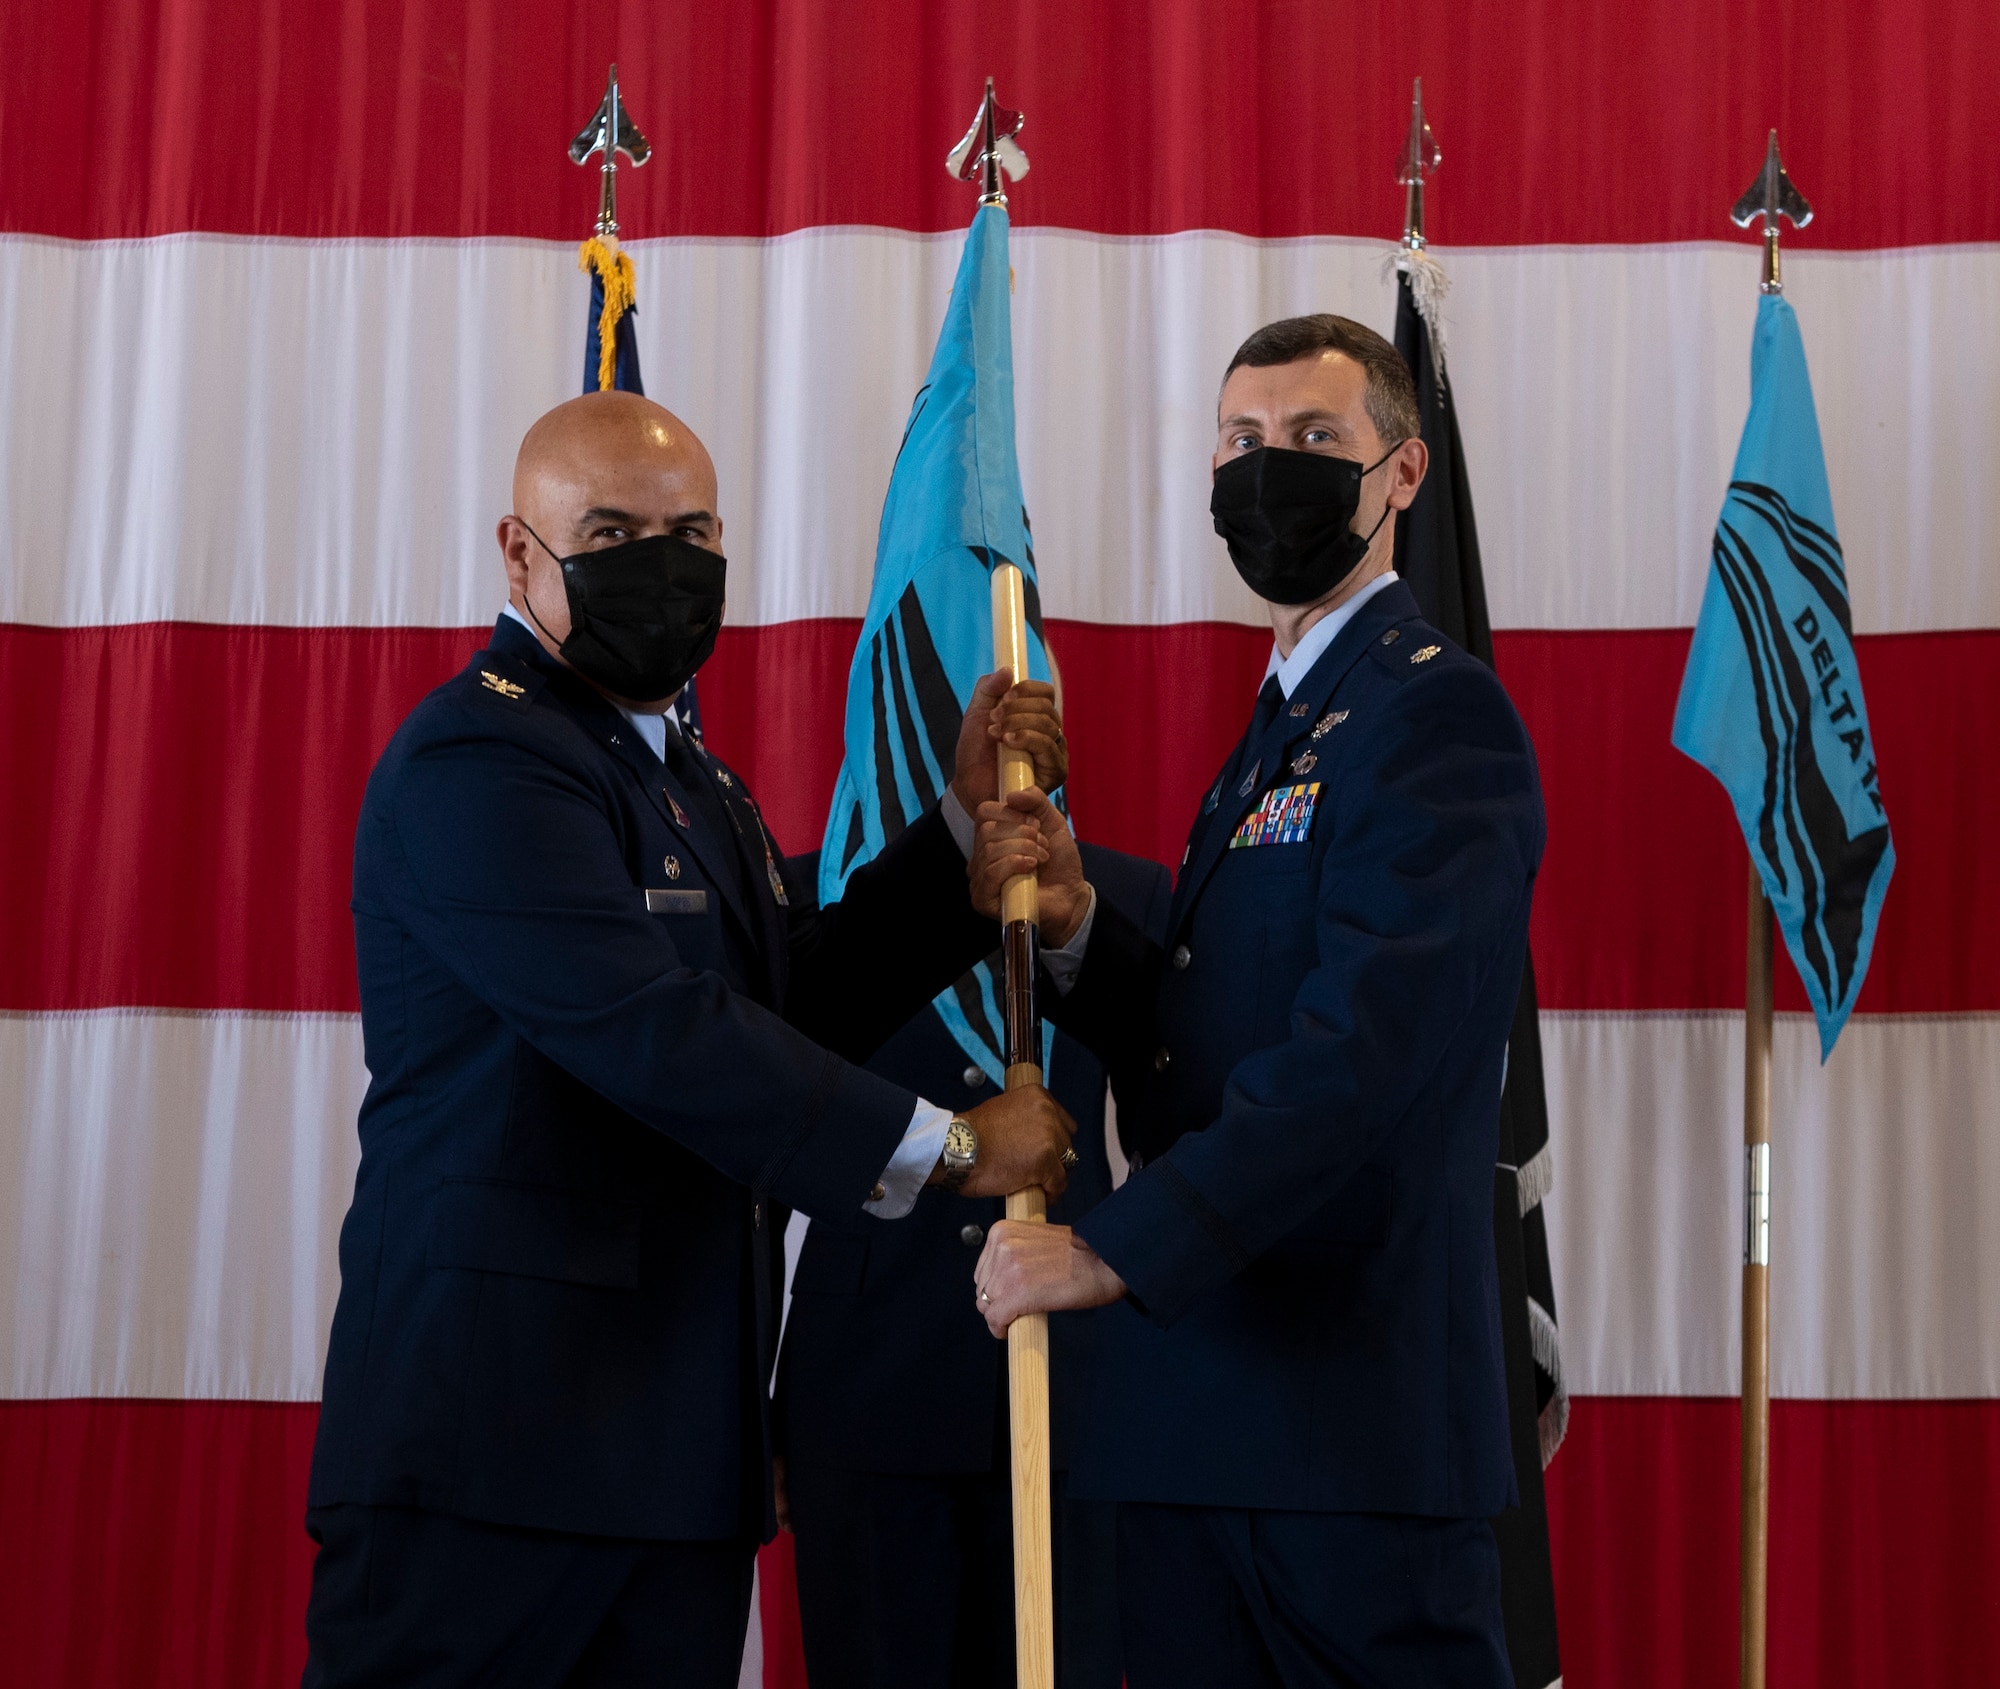 Commander hands off guidon during assumption of command ceremony